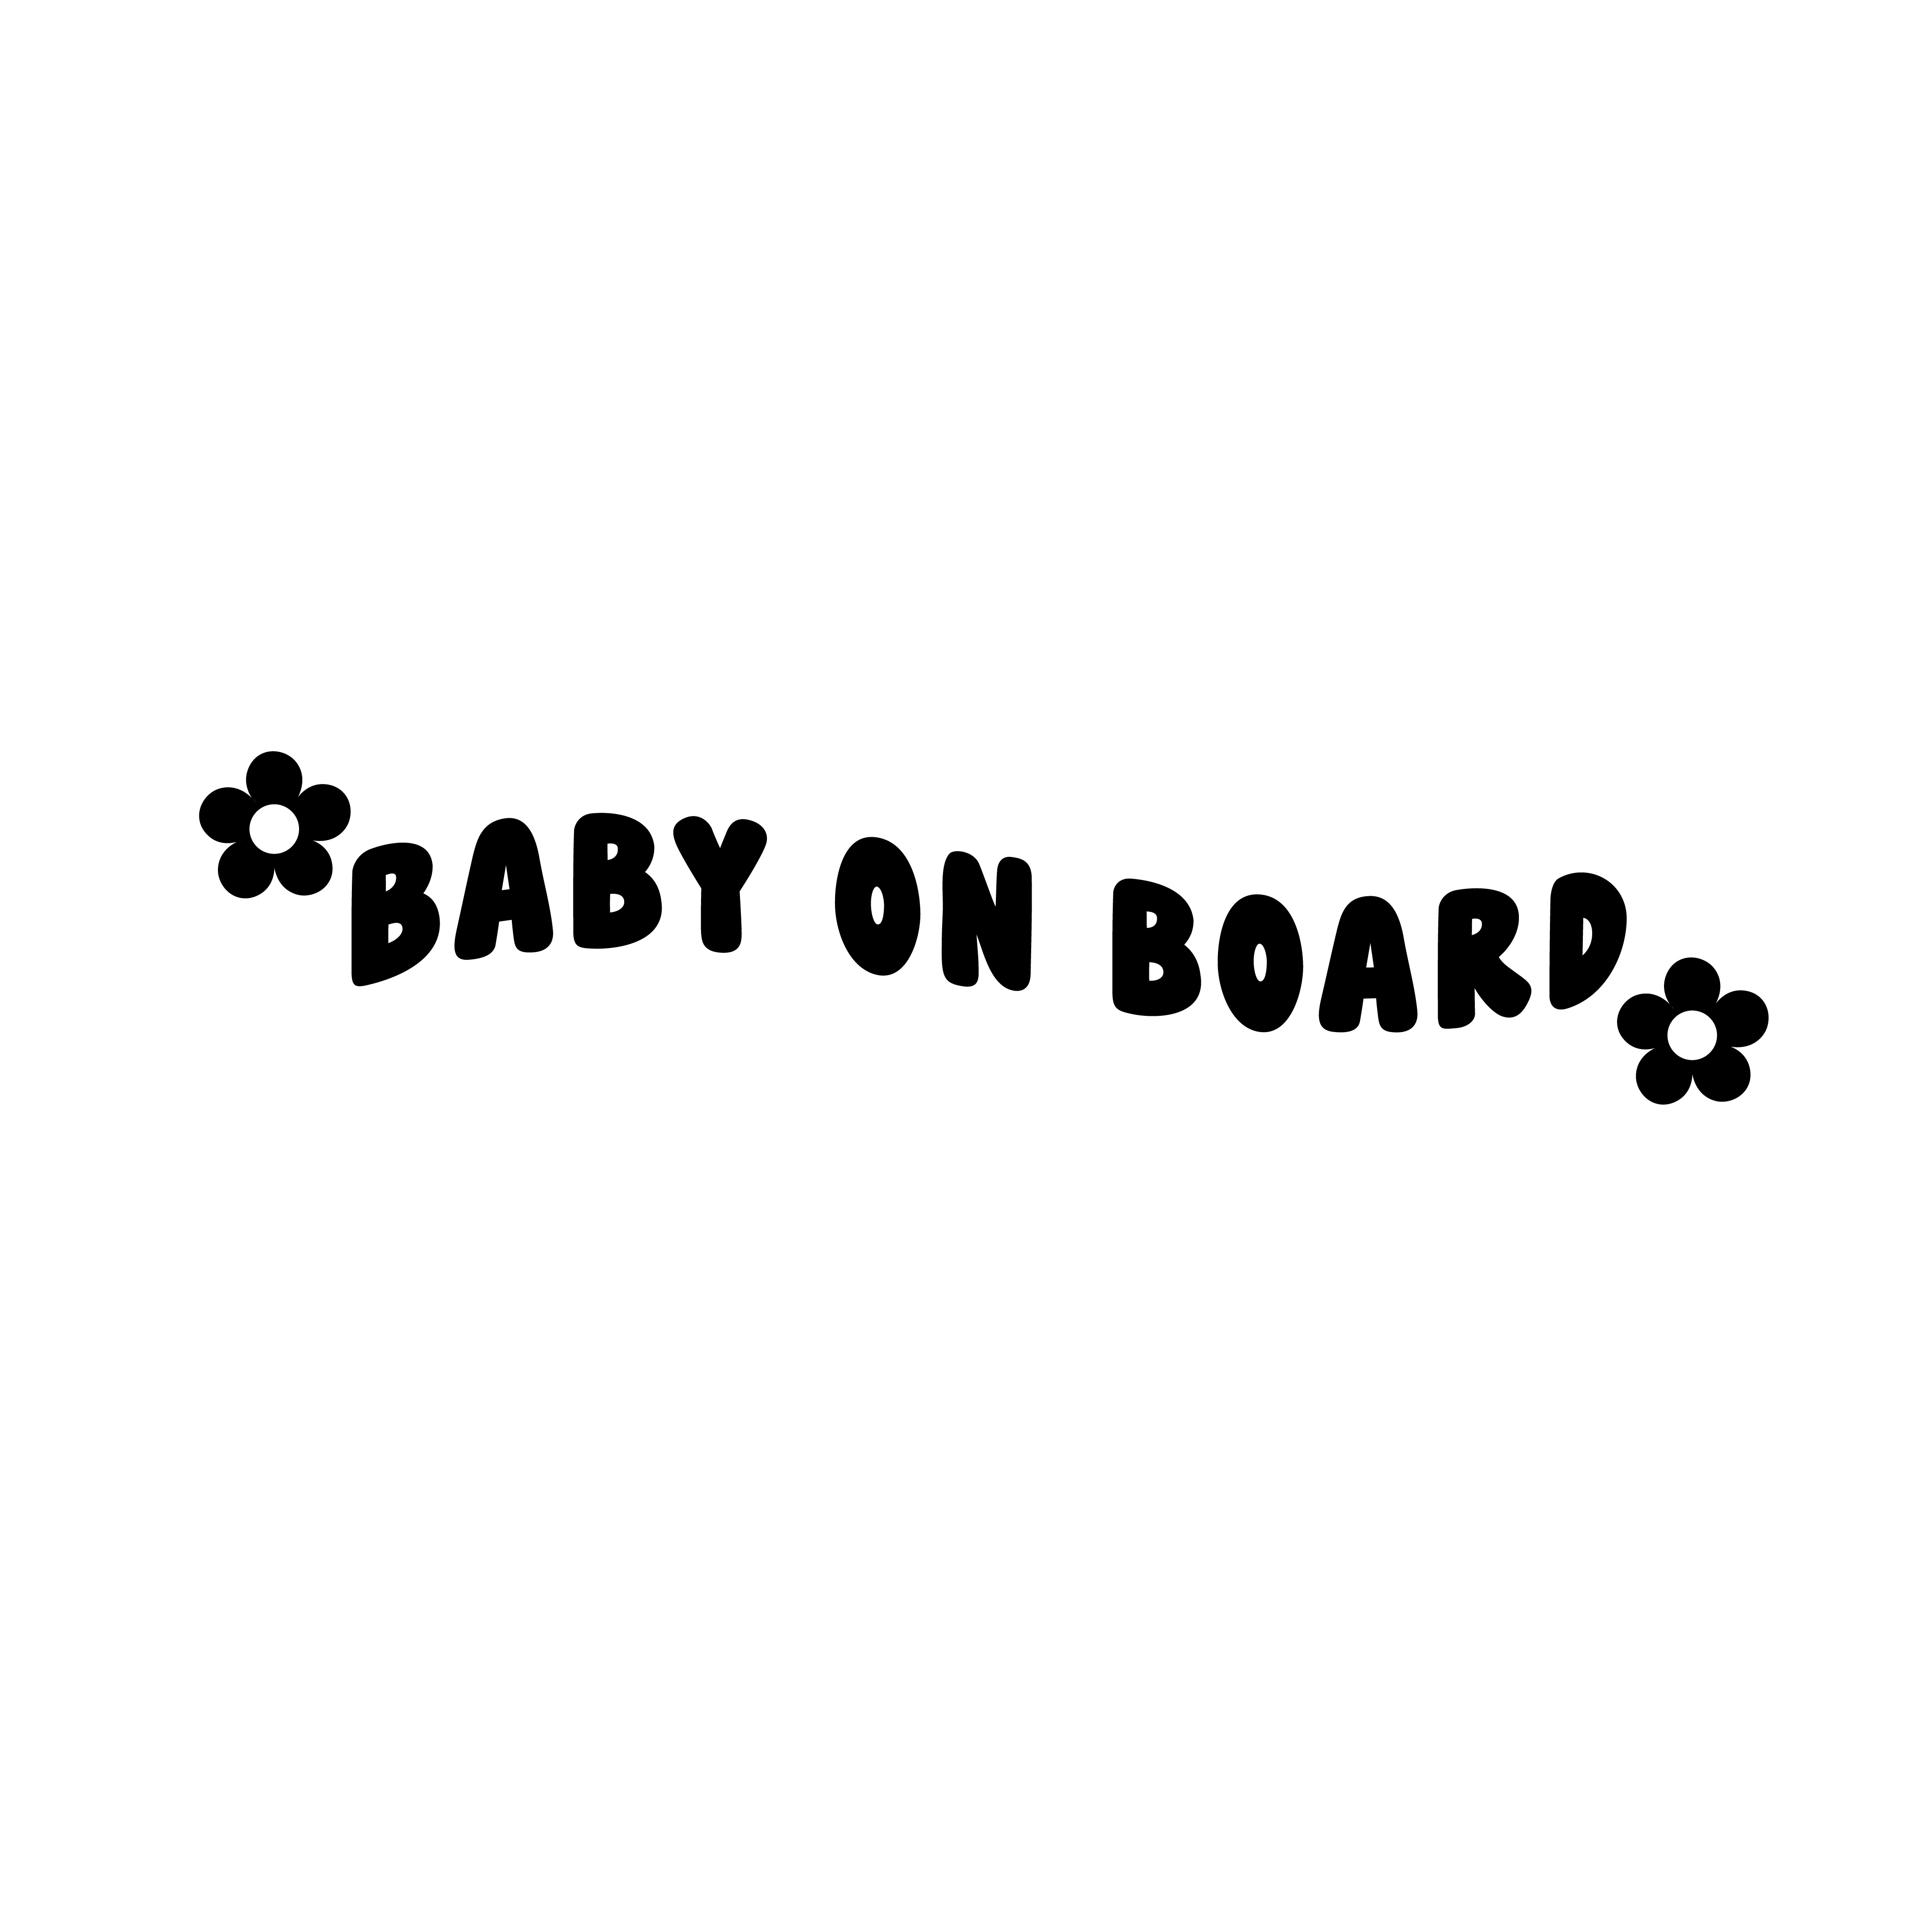 Baby On Board decal